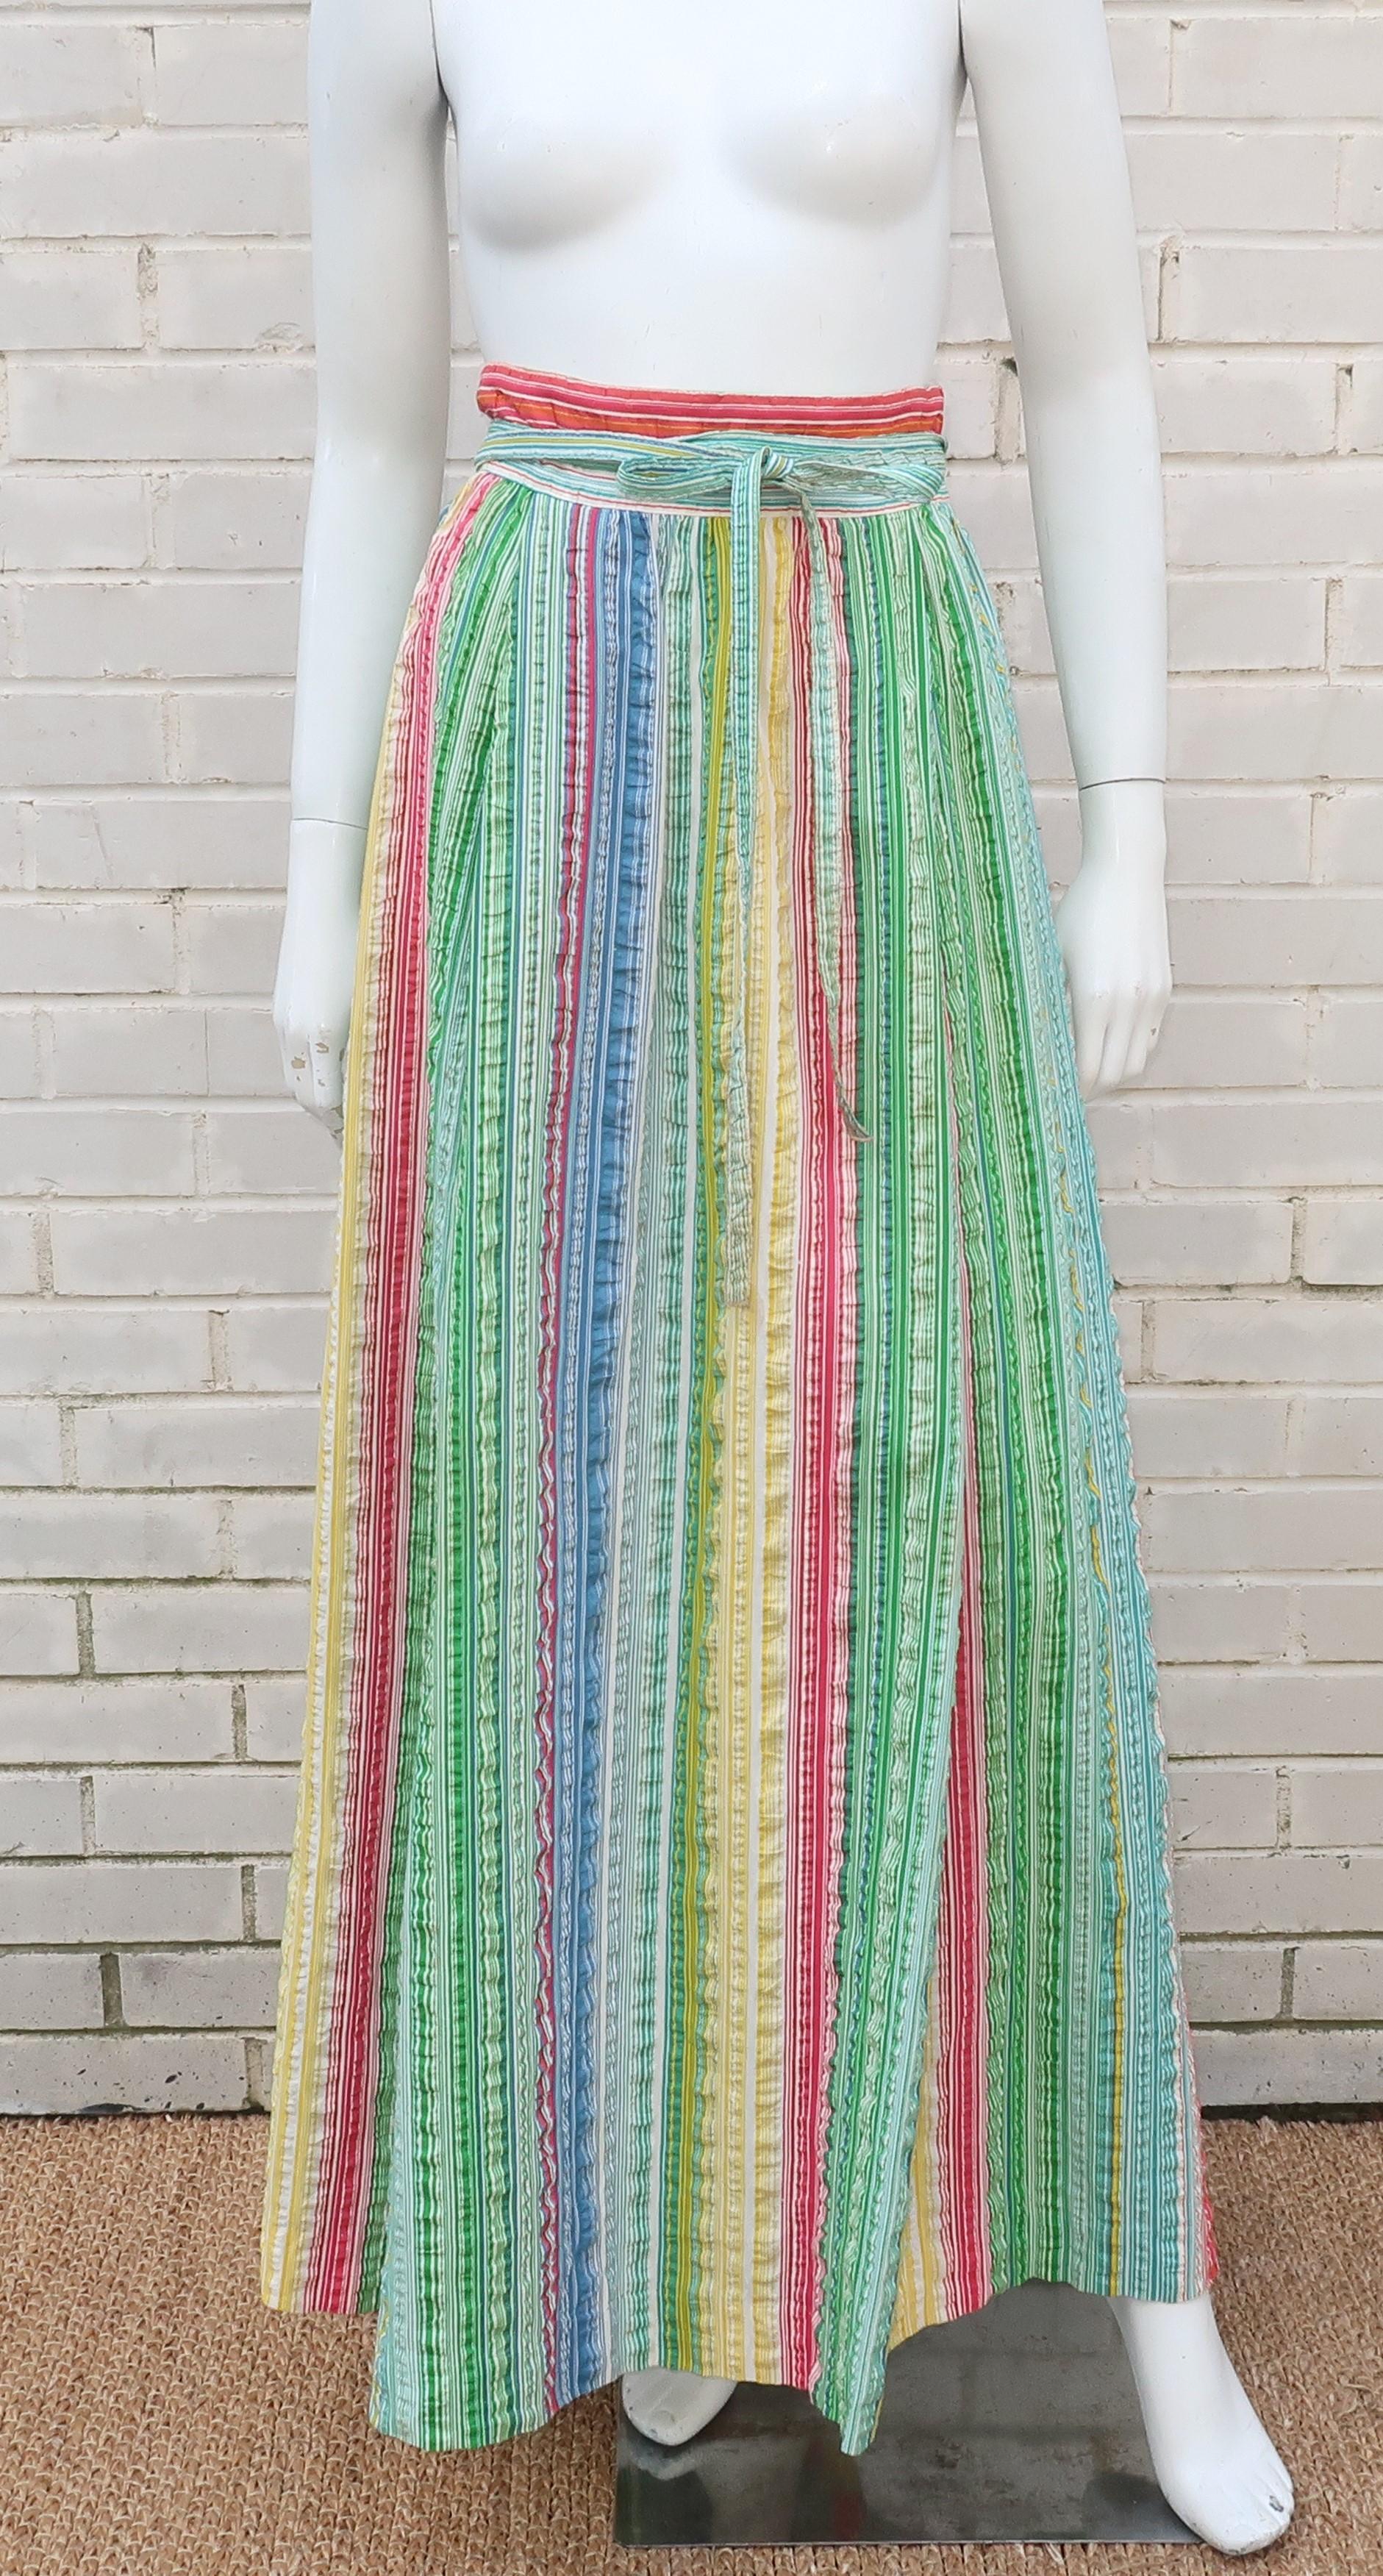 Seersucker was made for Summer!  This adorable striped seersucker maxi skirt wraps and ties for an easy breezy look to pair with t-shirts, halter tops or an alternative to a bathing suit cover-up.  The primary colors include blue, yellow, green and